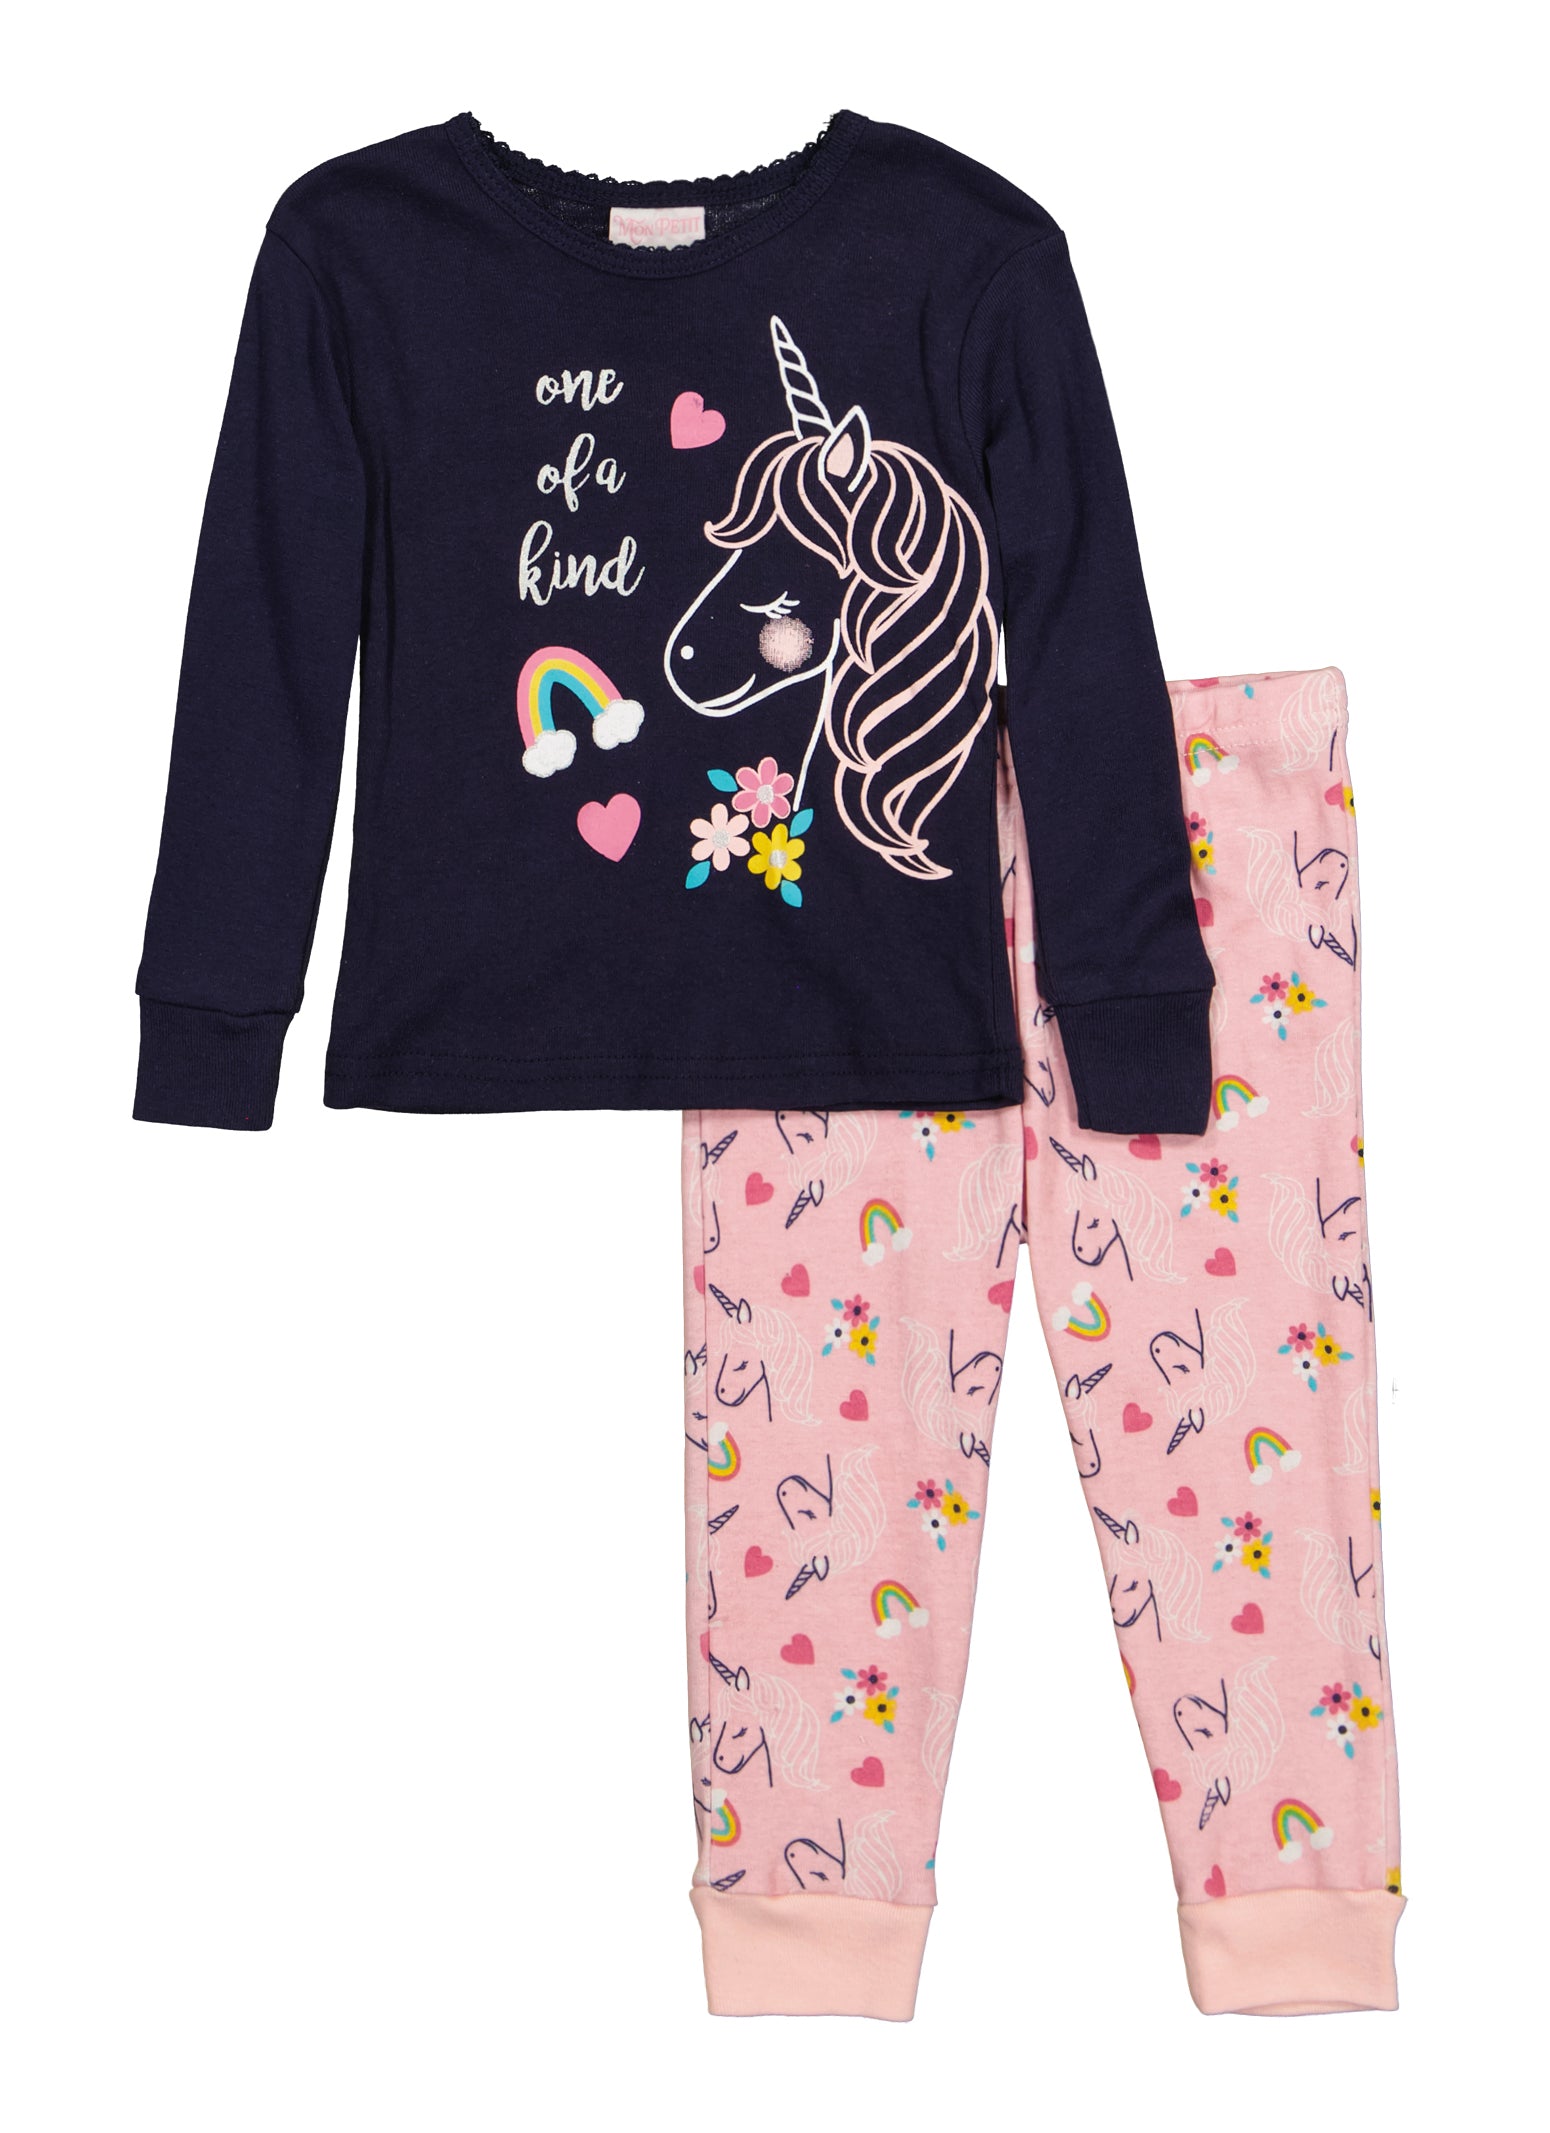 Toddler Girls Glitter Graphic Pajama Top and Pants